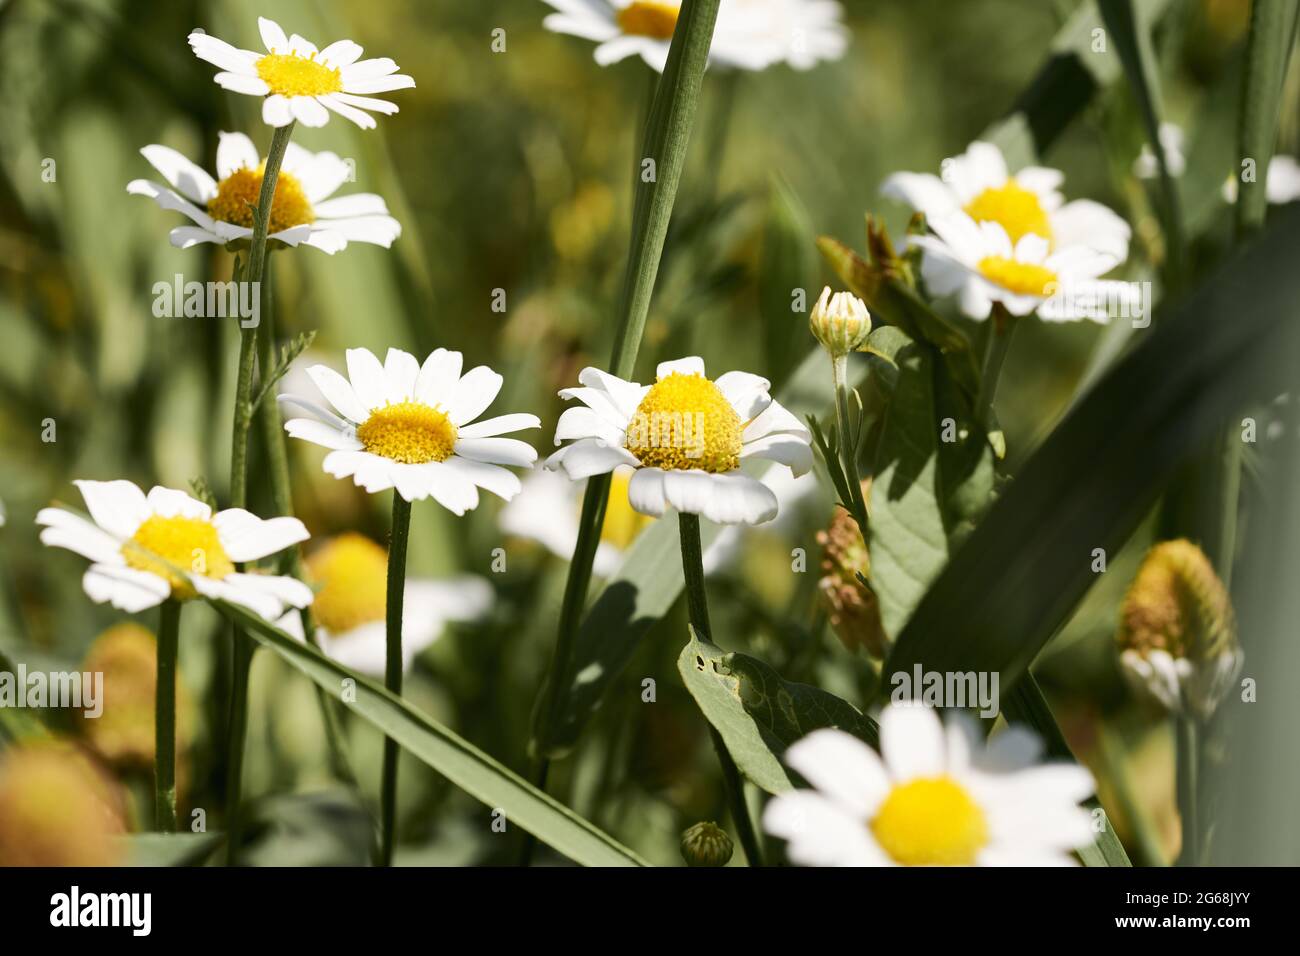 Daisy flowers in green meadow, close-up of Bellis perennis, camomile. Stock Photo